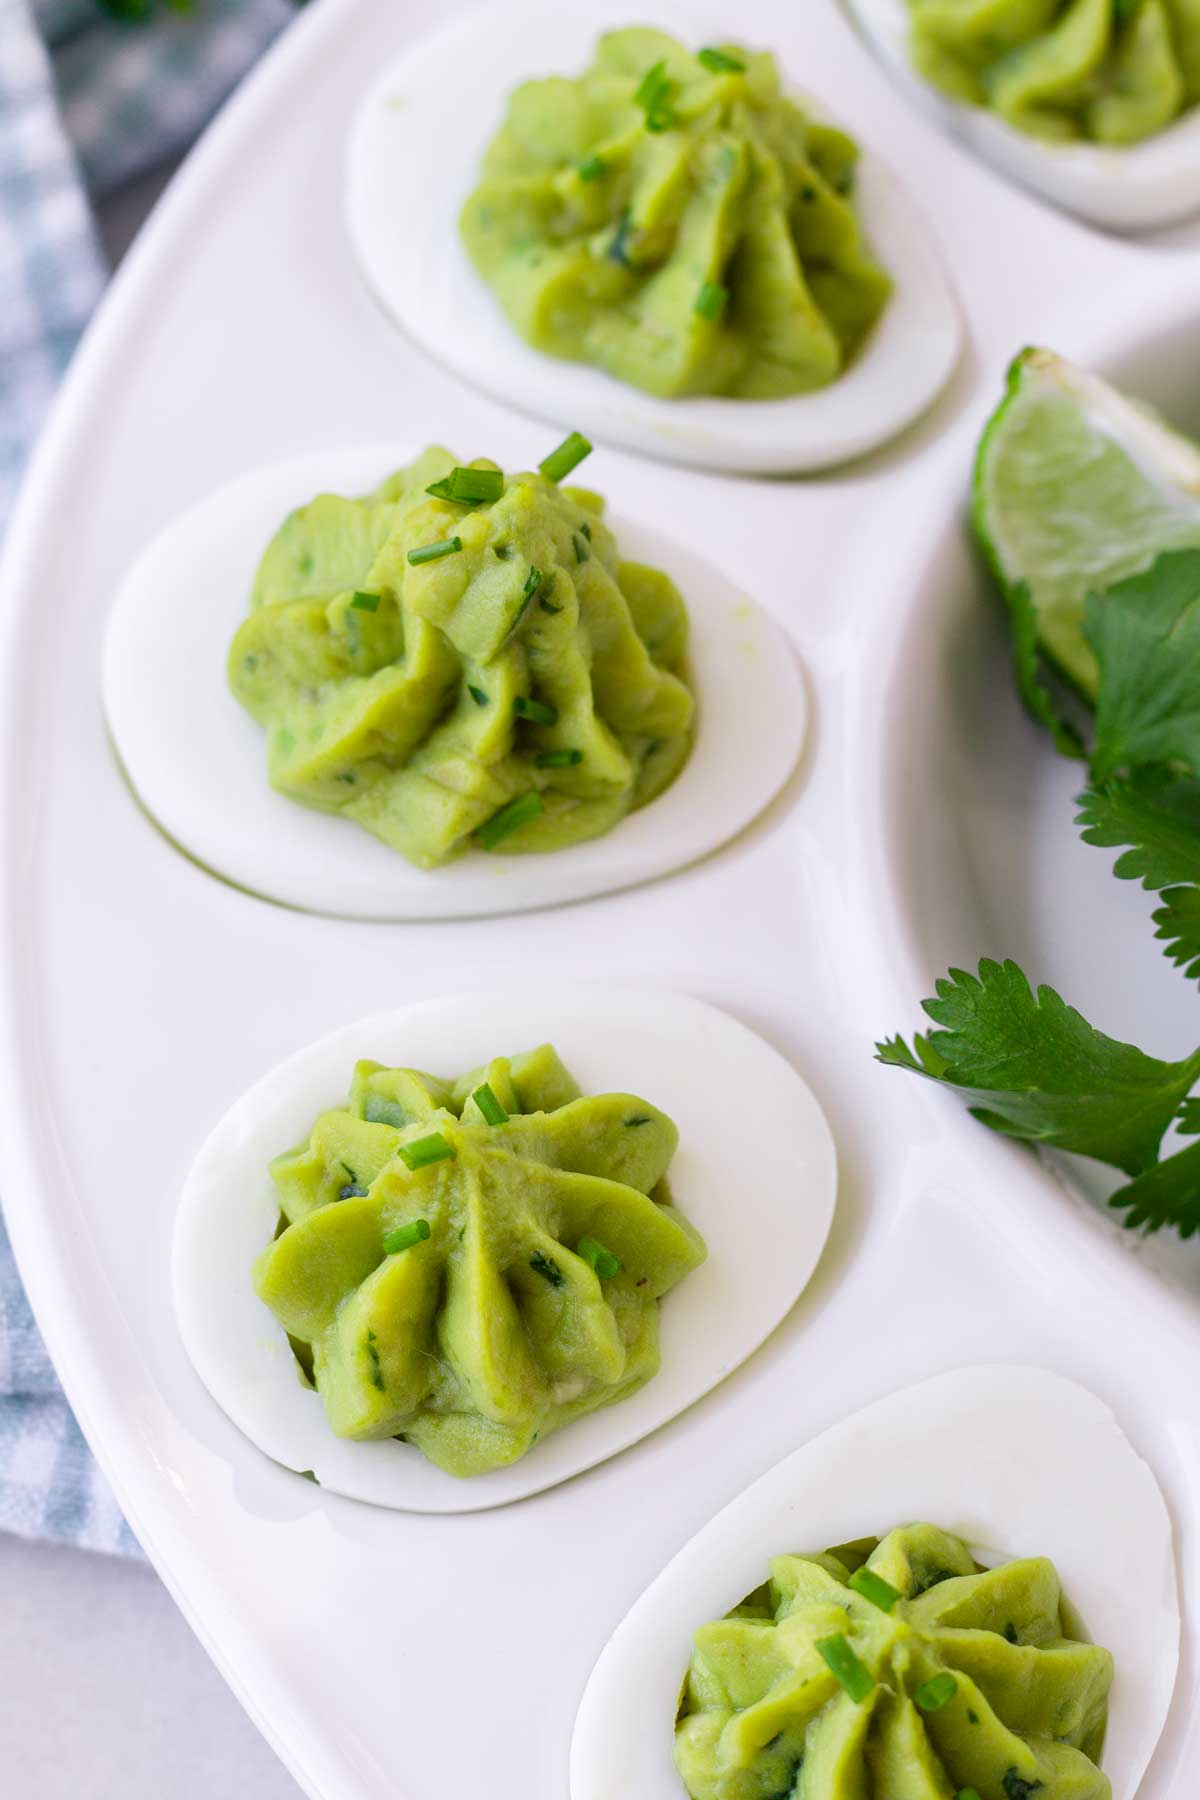 piped deviled eggs made with avocado filling